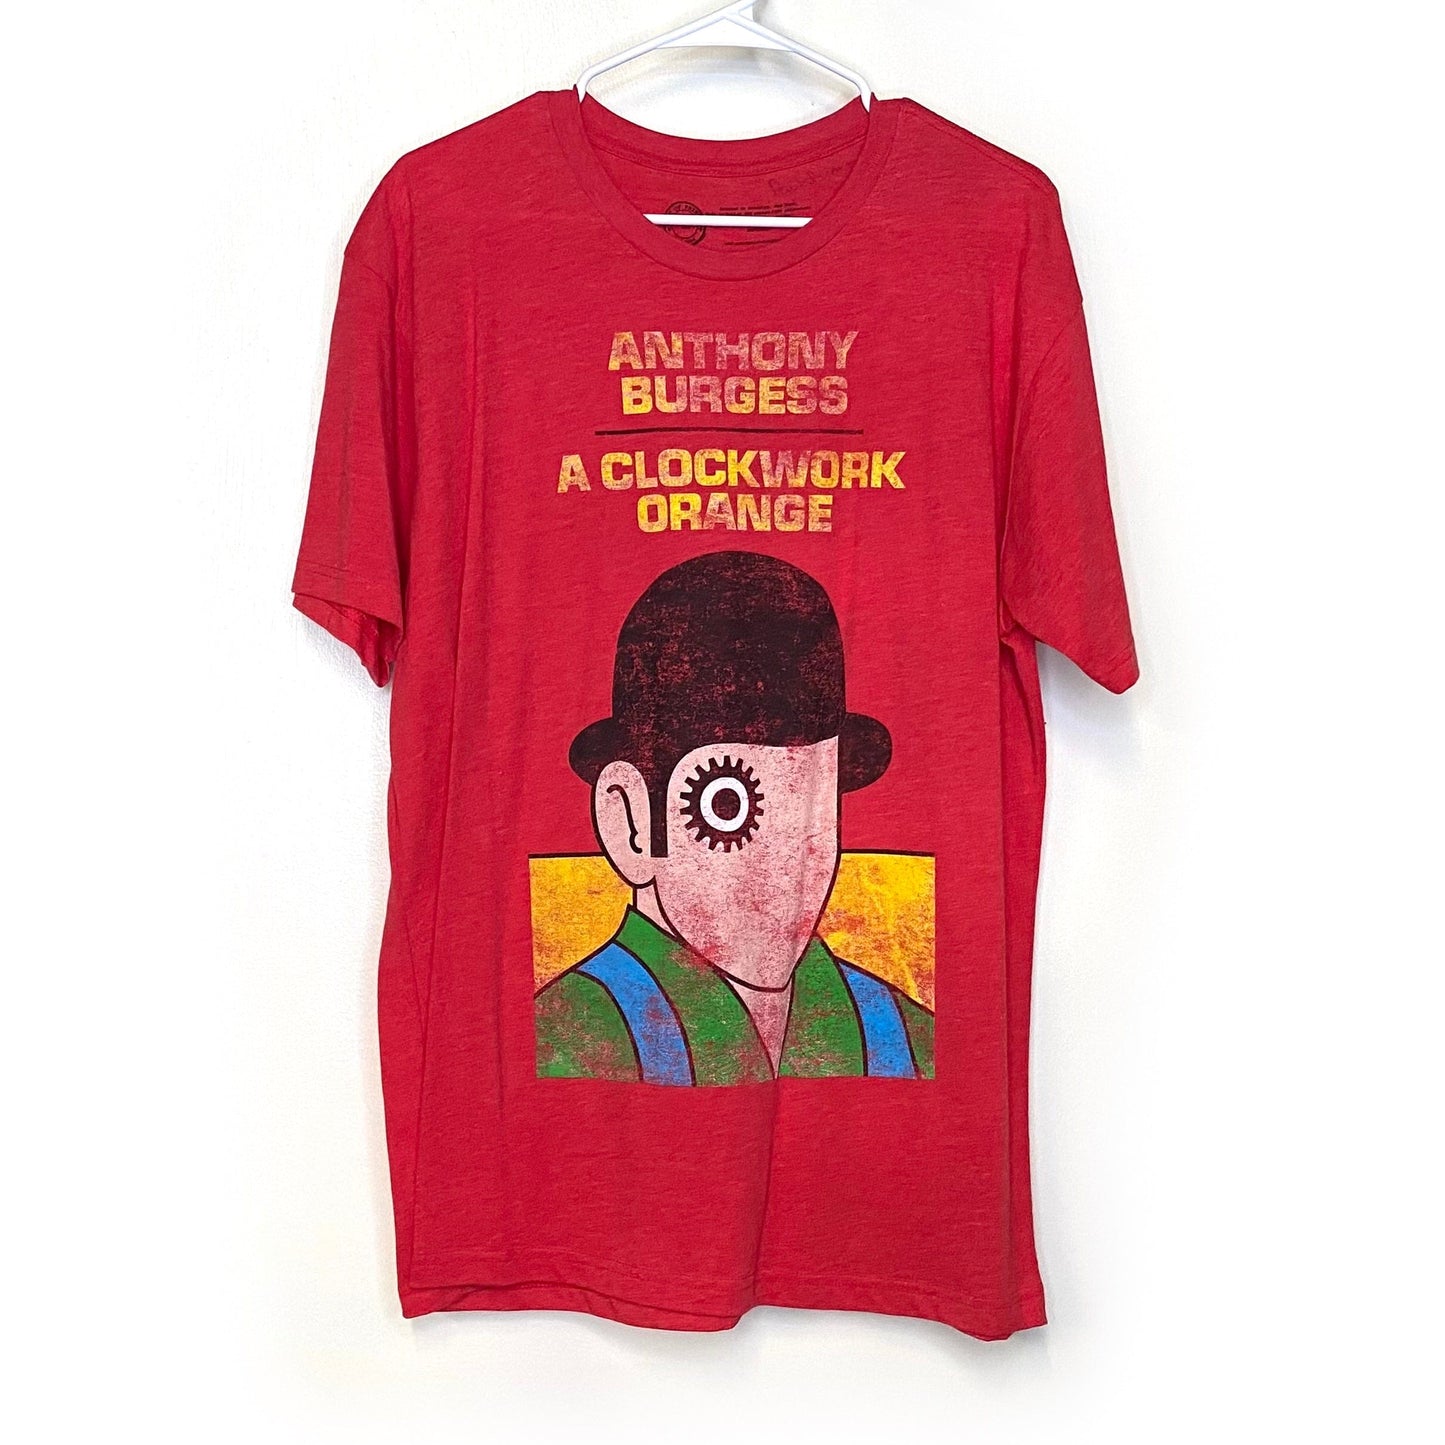 Out Of Print Mens Size L Red "Anthony Burgess A Clockwork Orange" Graphic T-Shirt S/s EUC